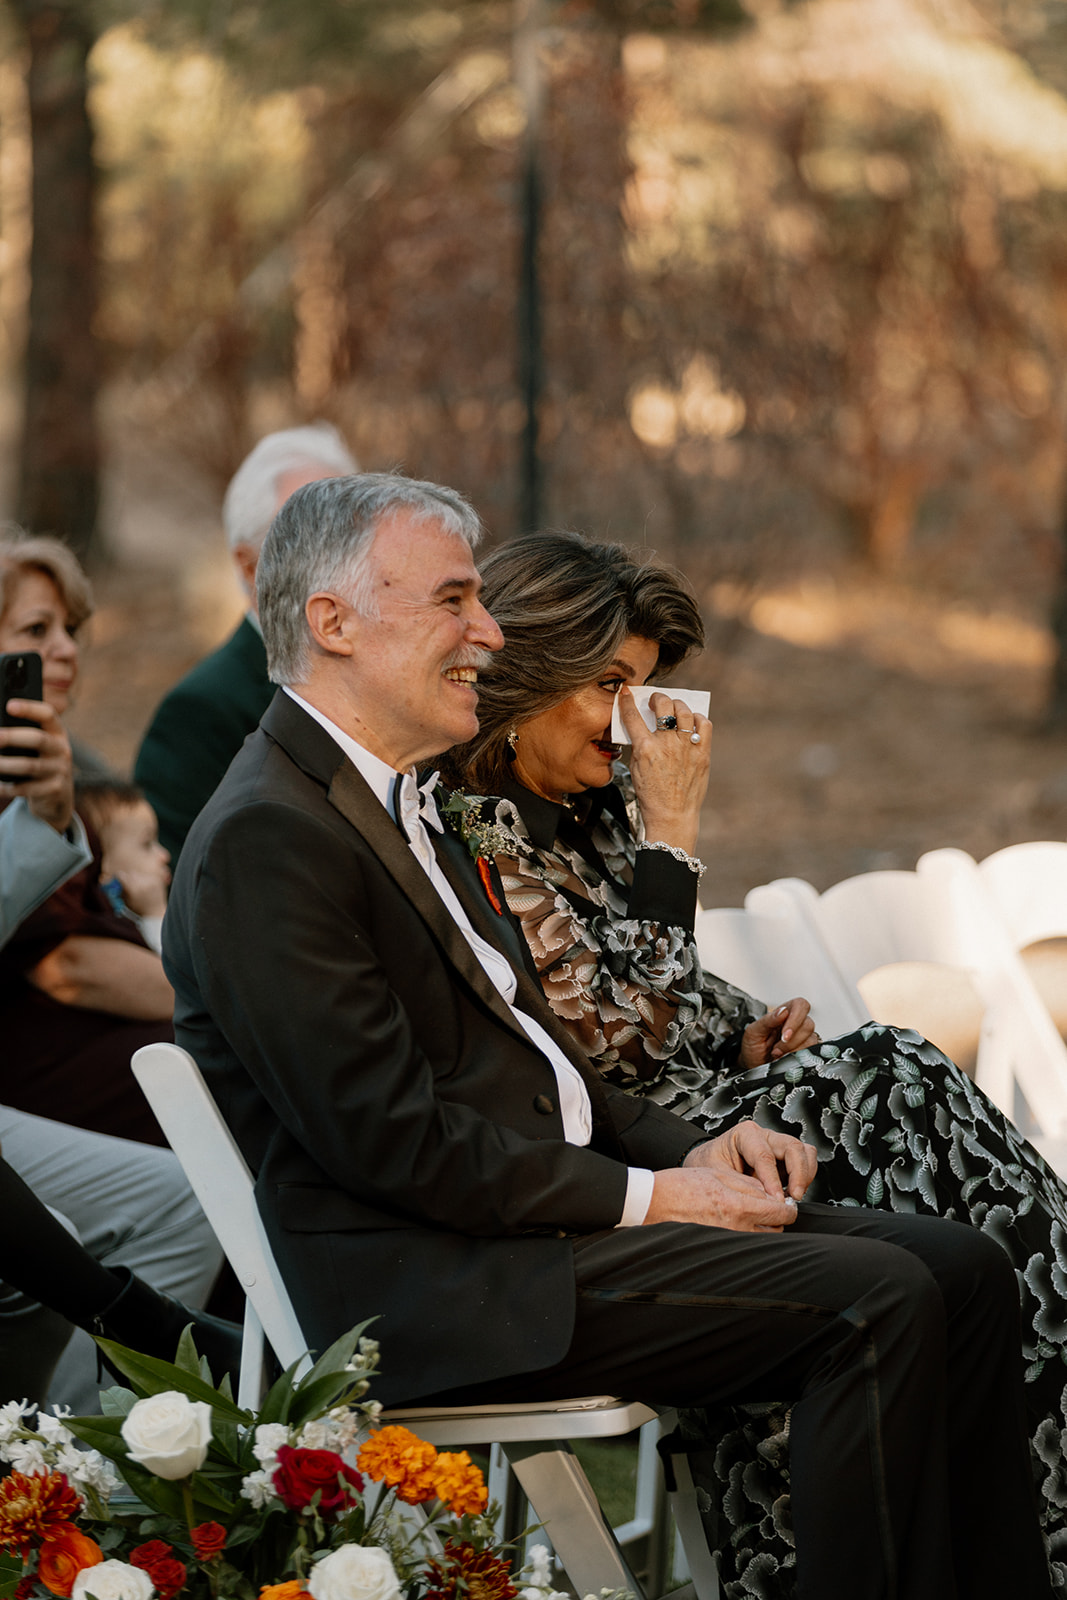 Brides mom and dad cry during their daughters dreamy wedding day